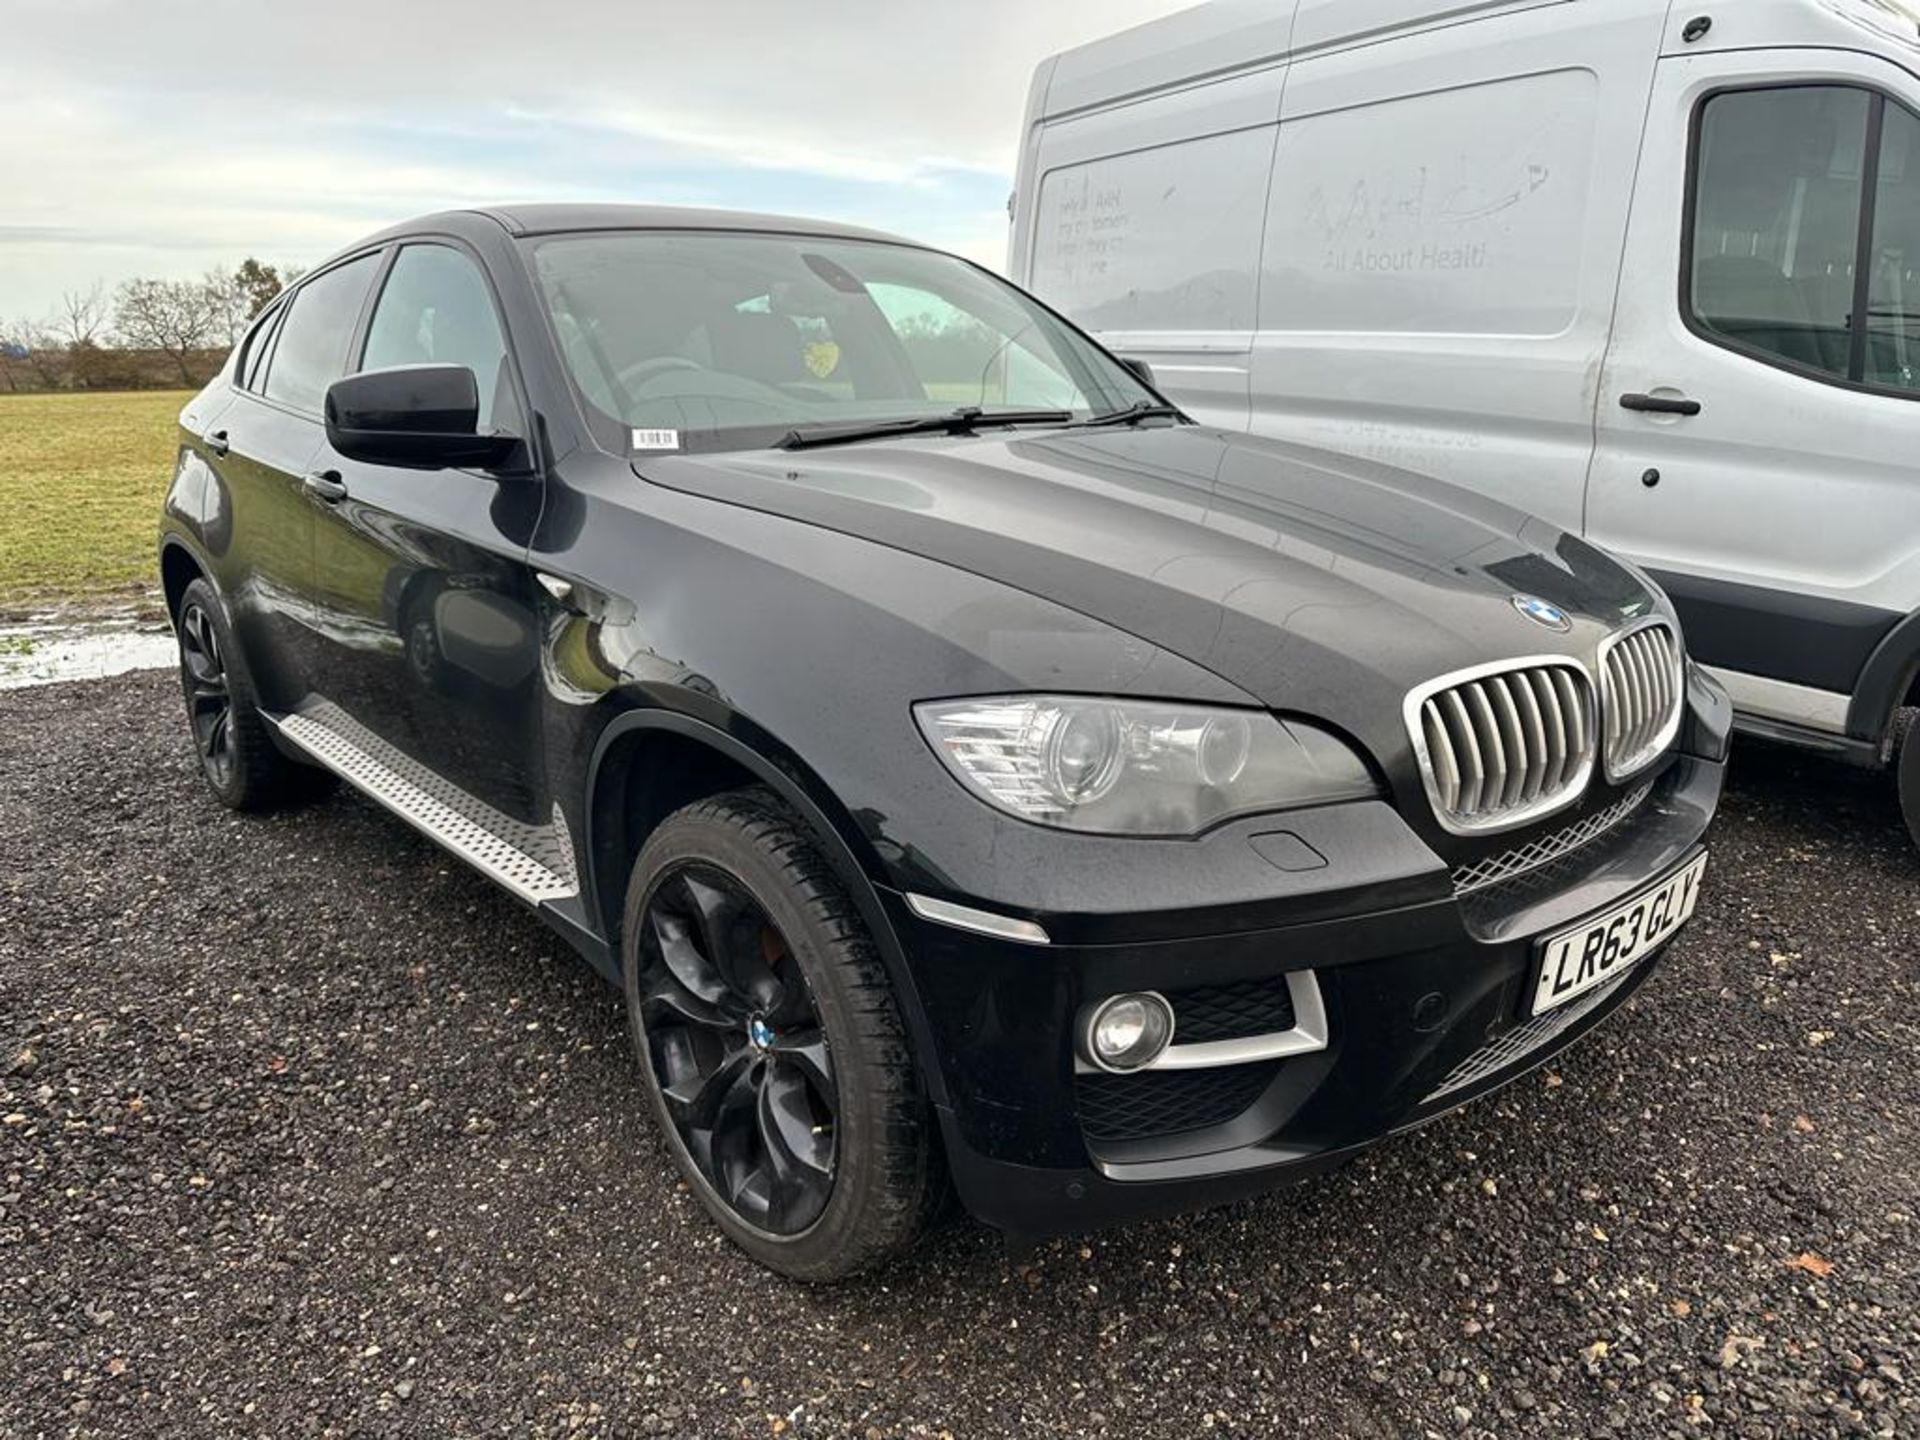 2013 63 BMW X6 40D SUV COUPE - 83K MILES - NON RUNNER ENGINE FAULT